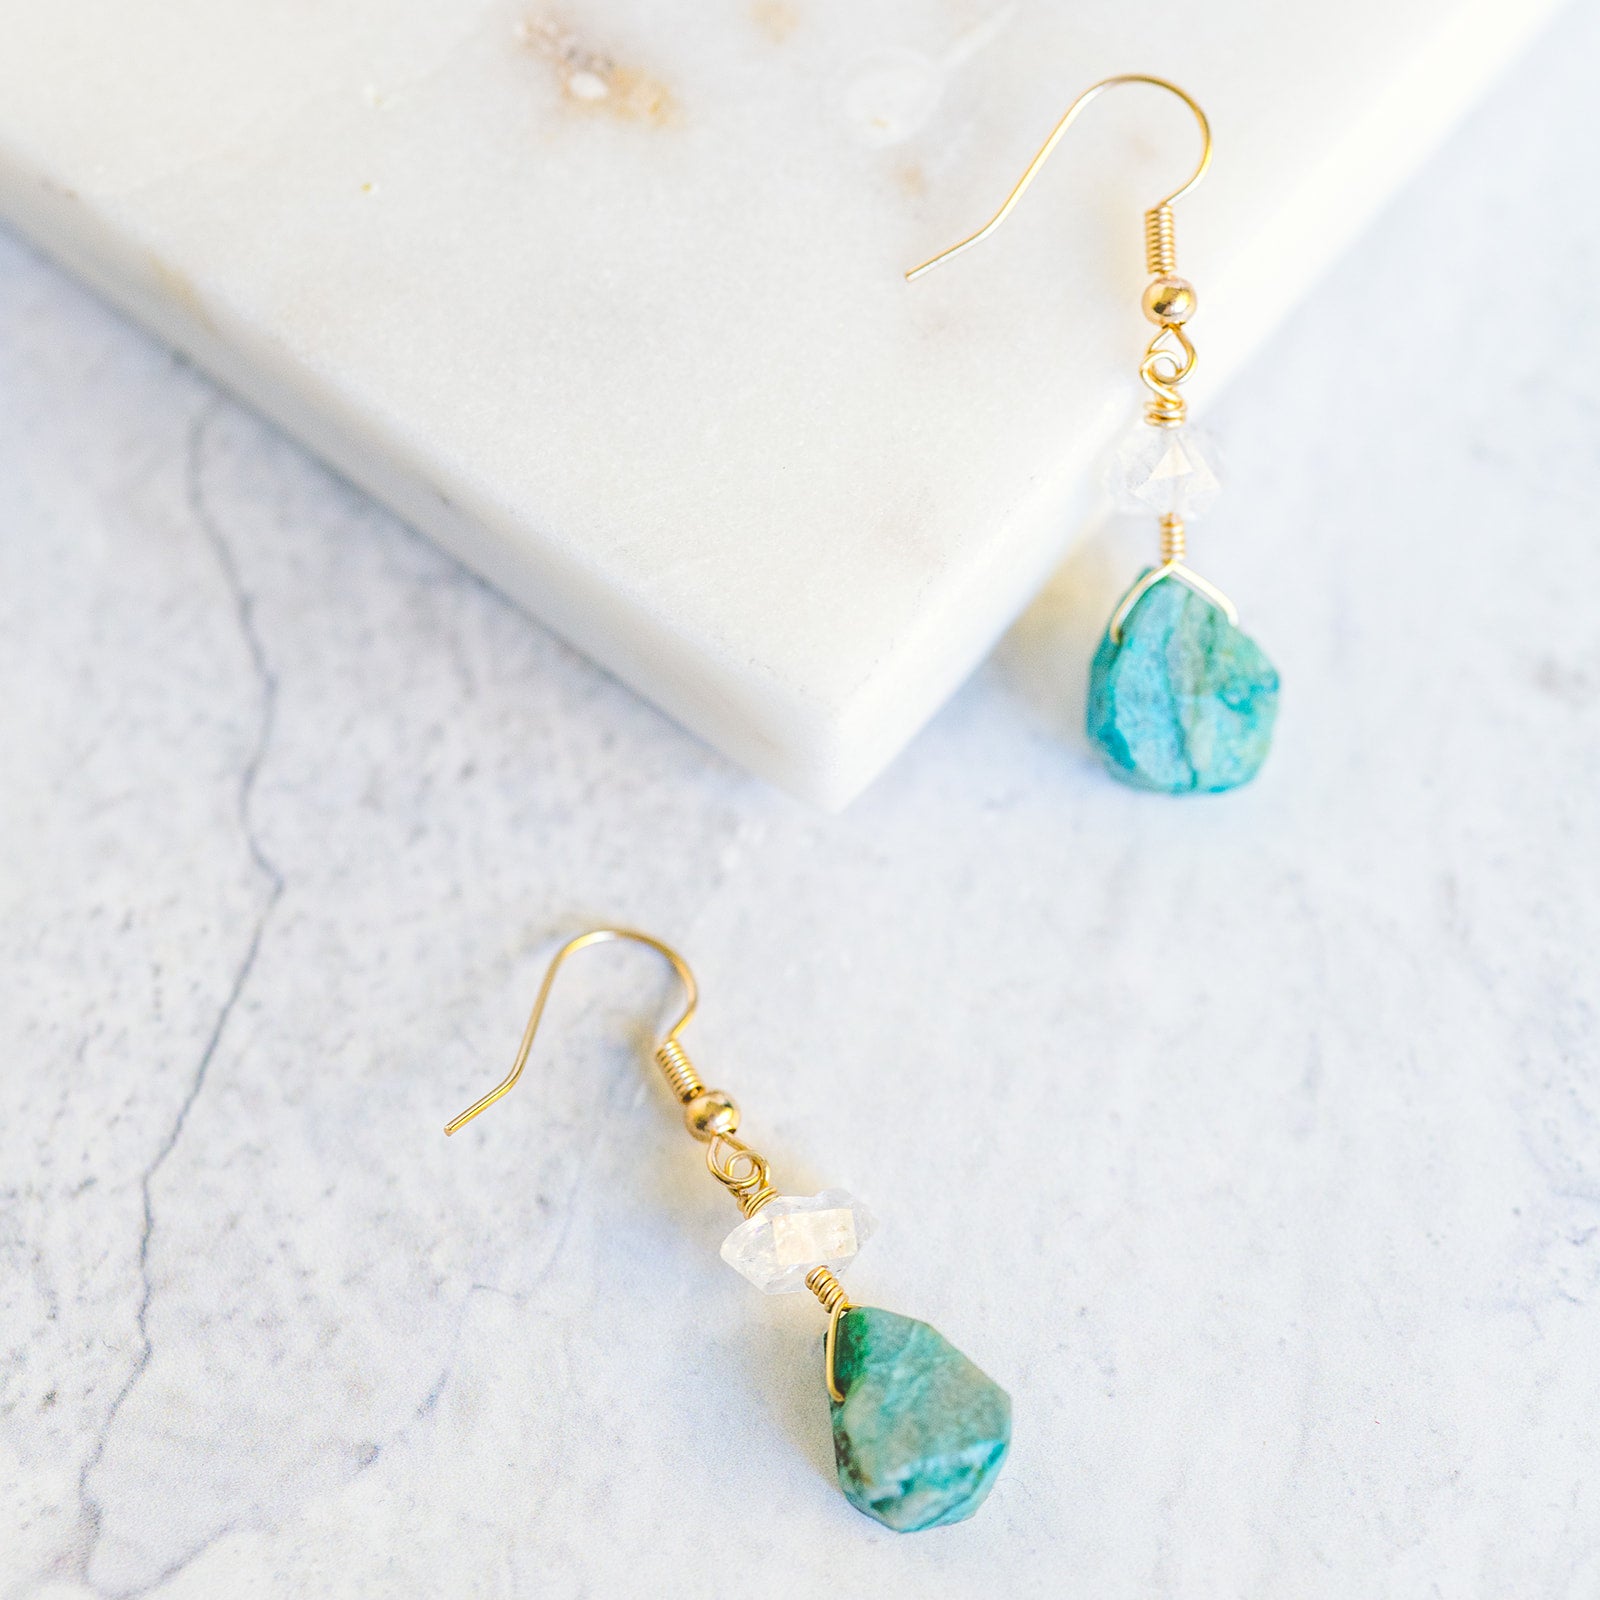 Wire Wrapped Crystal Earrings - Chrysocolla and Herkimer Diamond